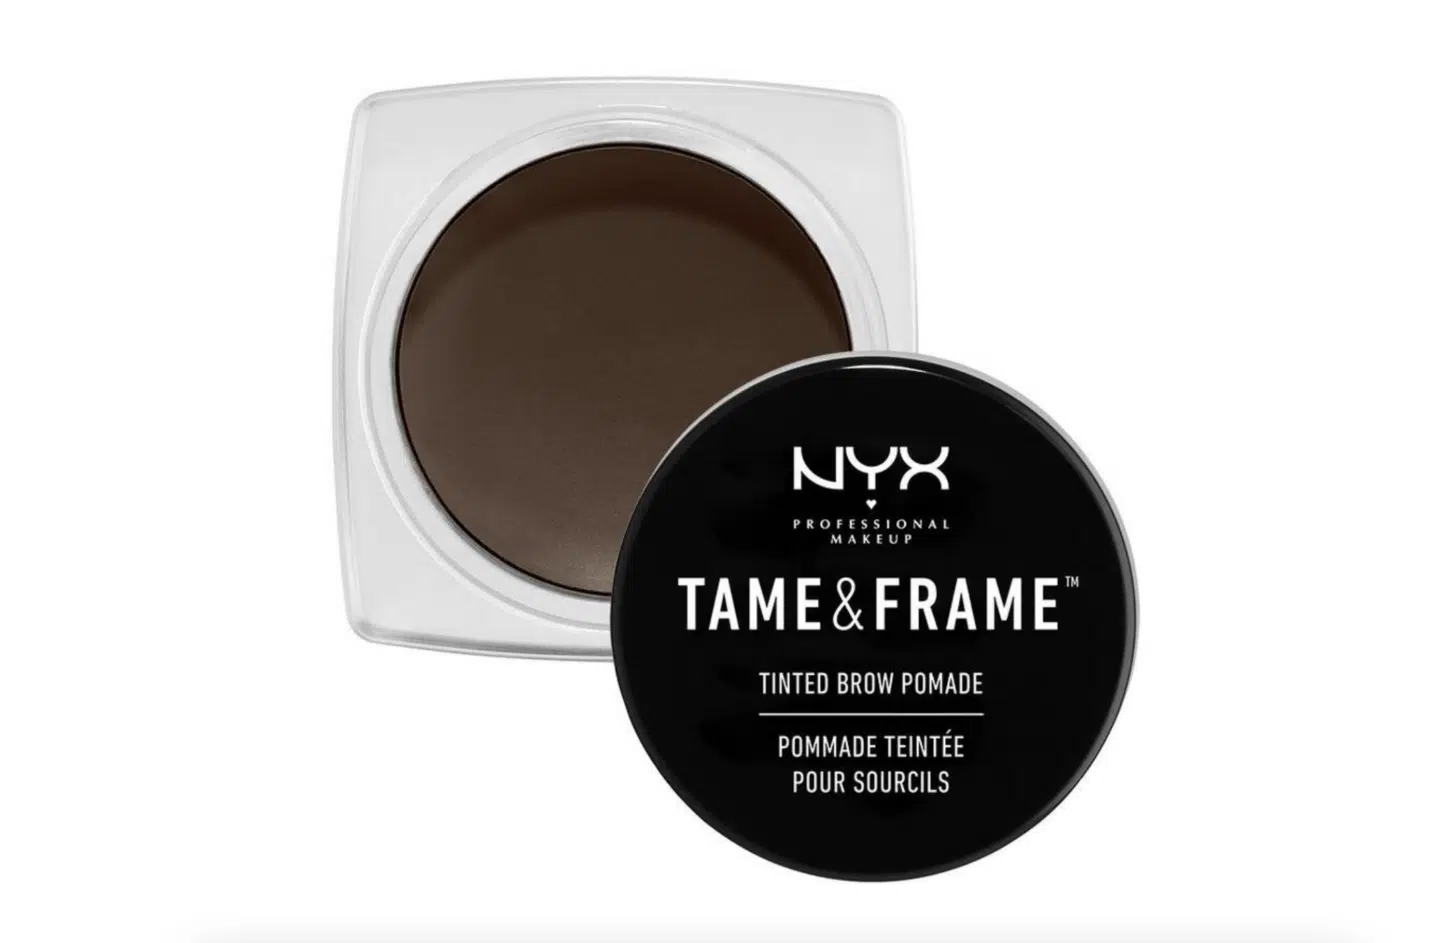 Best eyebrow pomade products, by beauty blogger What The Fab